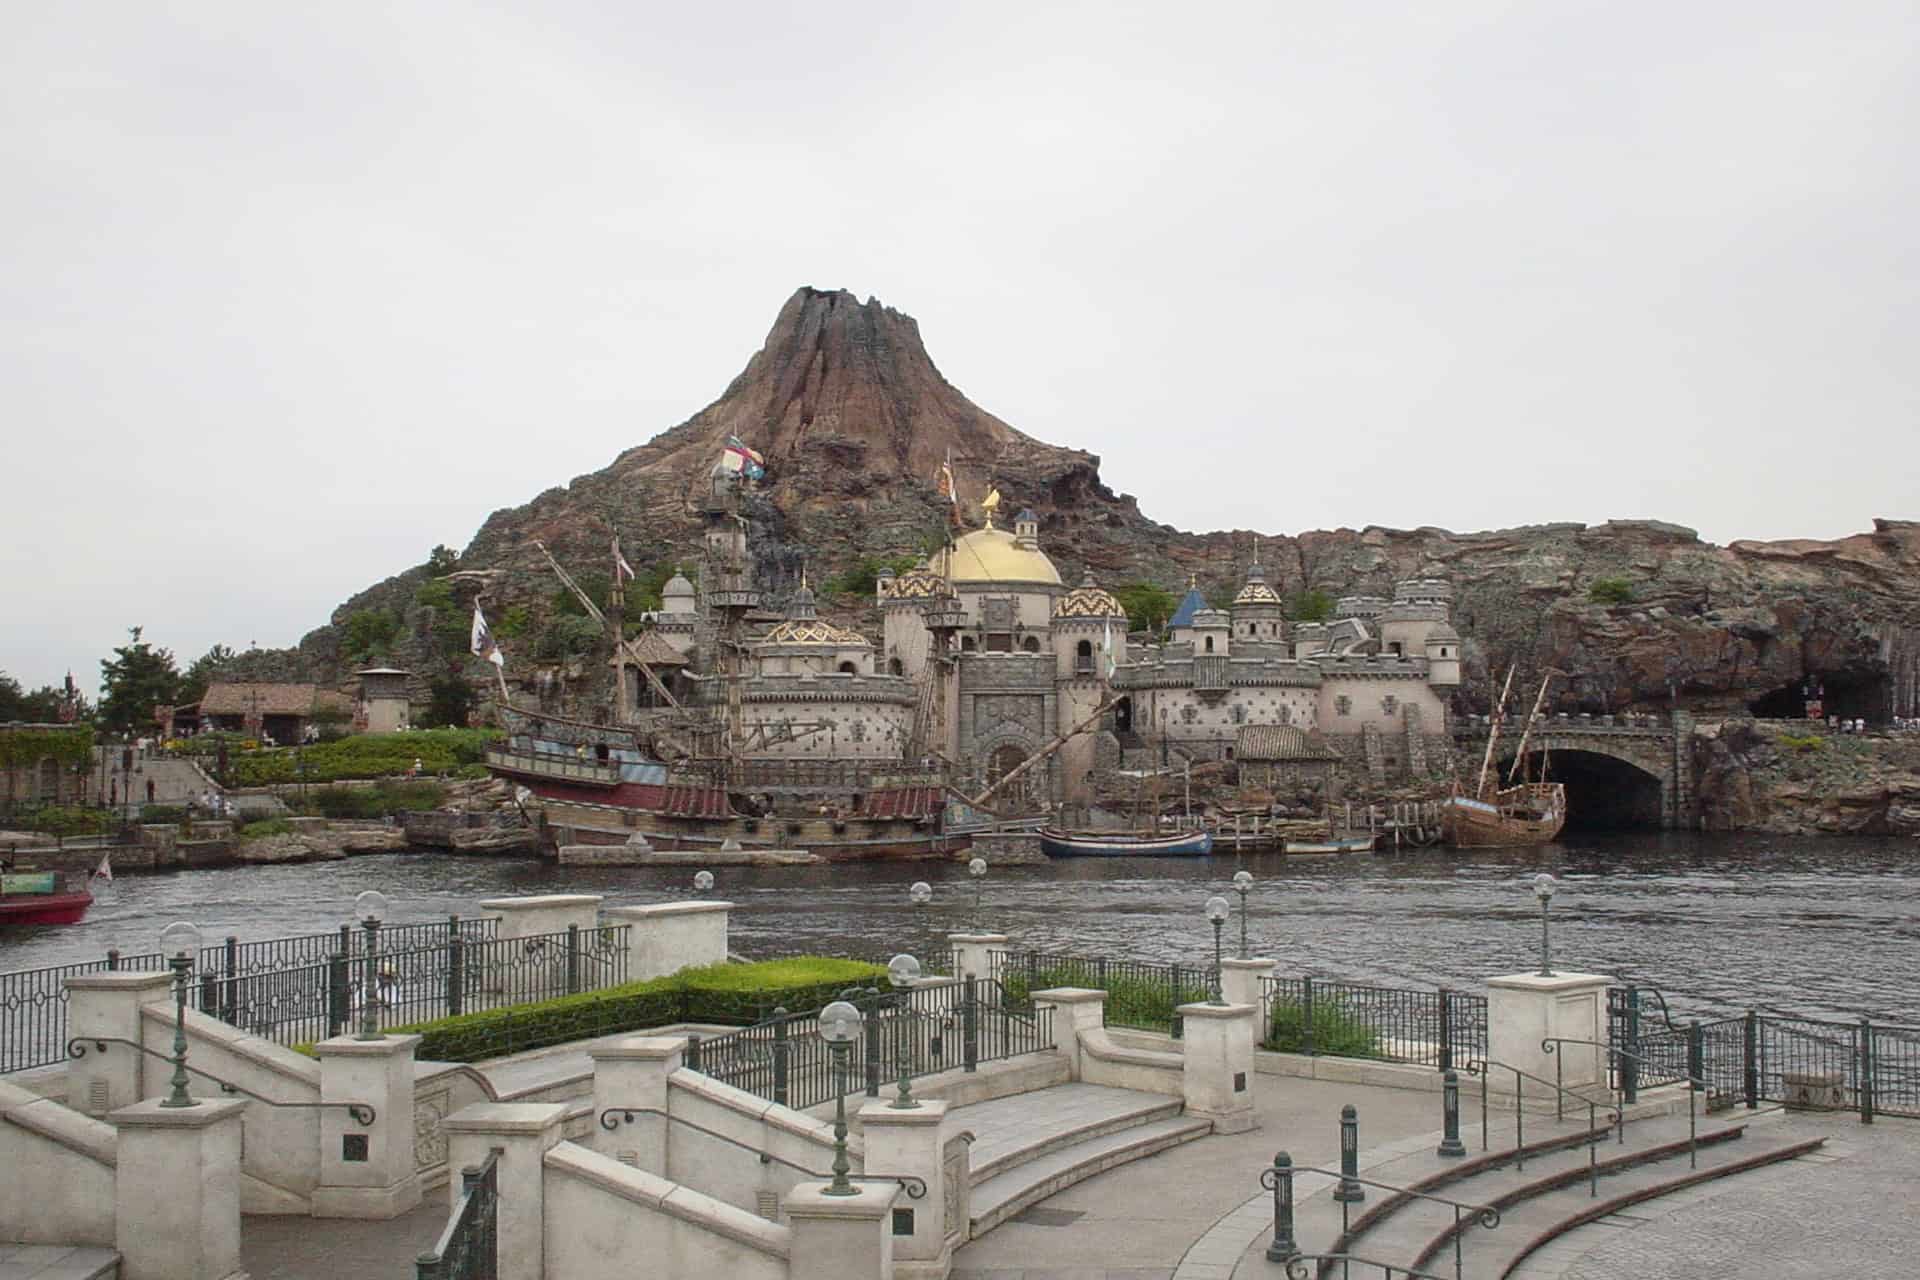 <p>Opening up on September 4, 2001, The Oriental Land Company owns Tokyo DisneySea. Similar to Tokyo Disneyland, all of Disney’s intellectual property is licensed for use in the park. Of course, the 10.1 million visitors in 2022 just focus on seeing Disney magic regardless of the owner. Across the area, there are a total of seven different themed lands including Mysterious Island, Arabian Coast, and Mermaid Lagoon.</p><p><span>Would you please let us know what you think about our content? <p>Agree? Tell us by clicking the “Thumbs Up” button above.</p> Disagree? Leave a comment telling us what you’d change.</span></p>